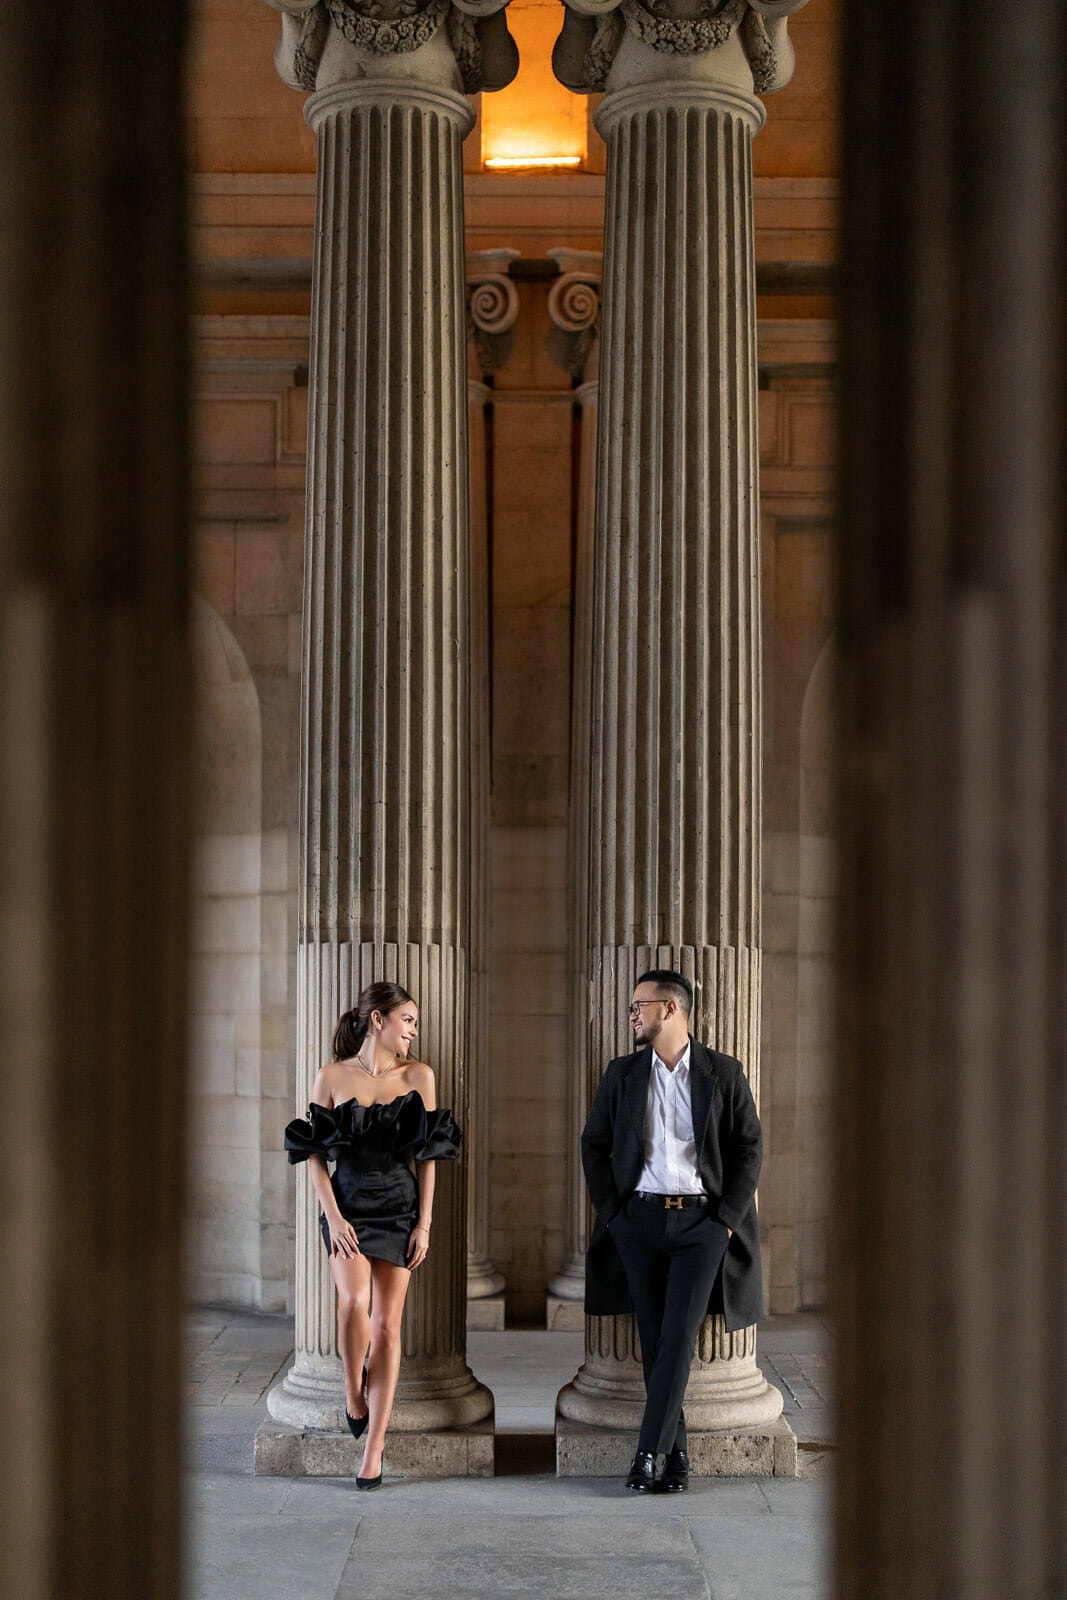 Cute Paris couple photoshoot at the Louvre Museum in the evening